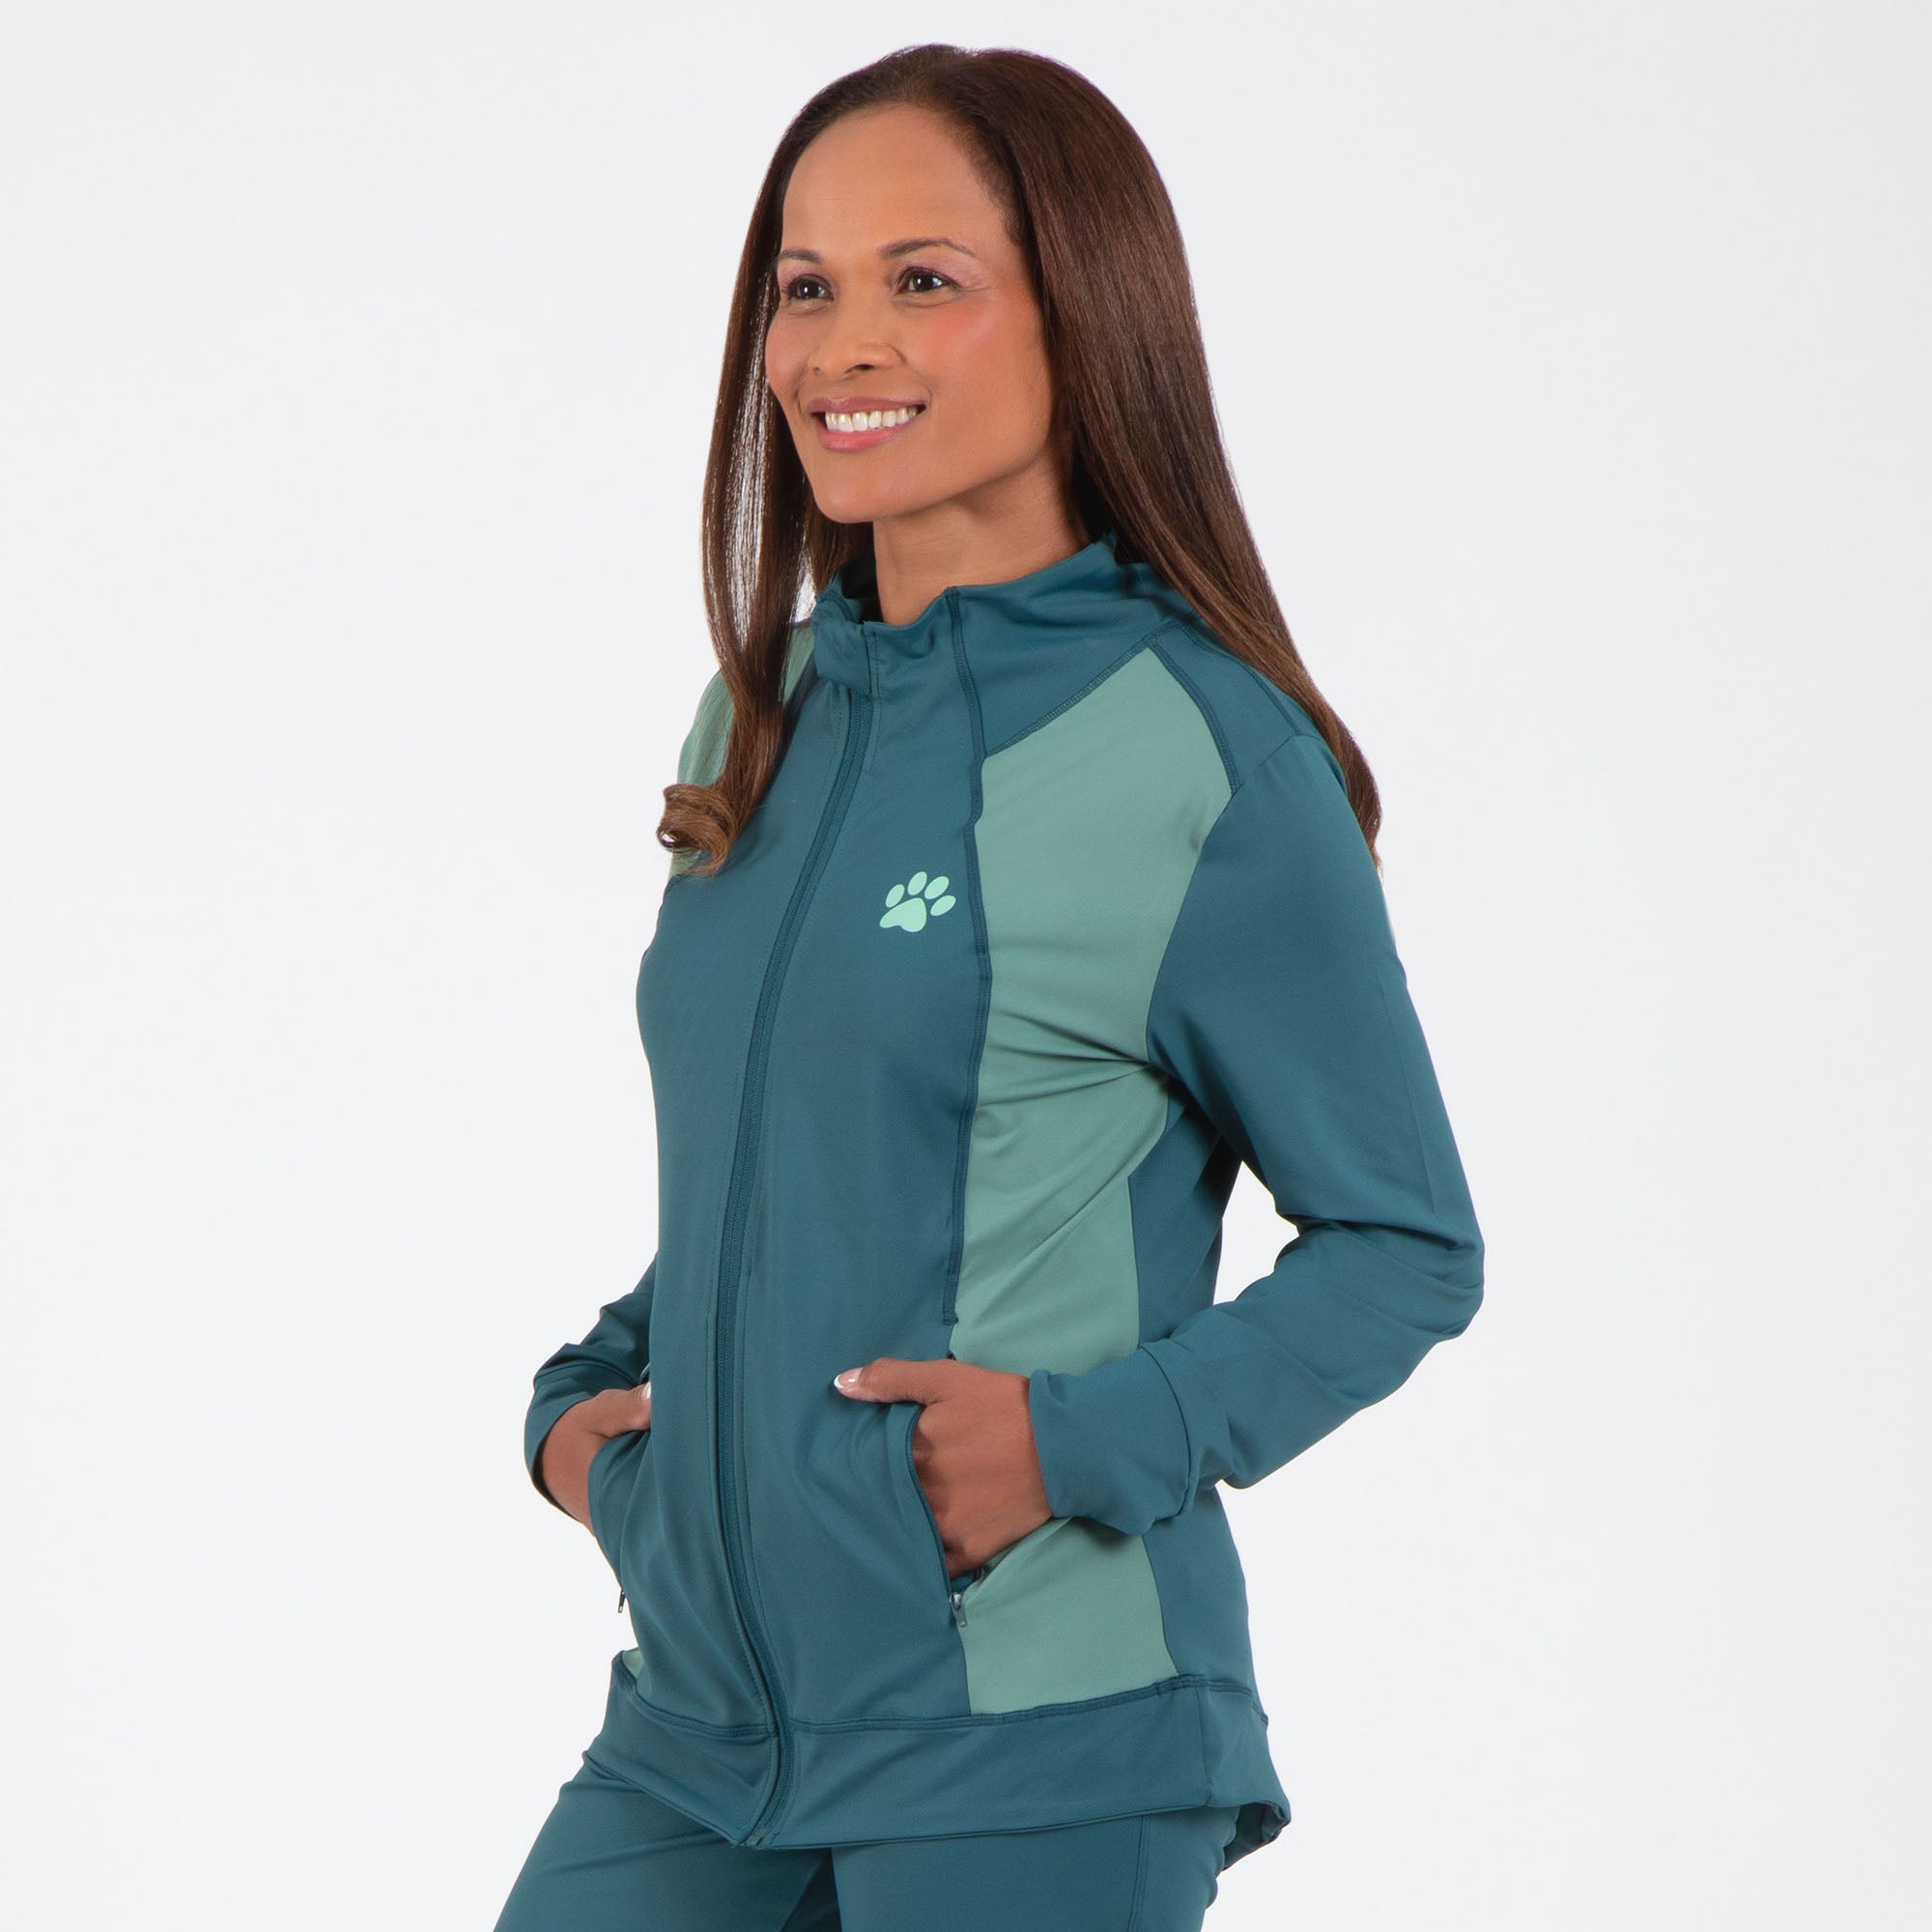 Yoga Paw Print Cross Over Separates - Teal - Jacket - L